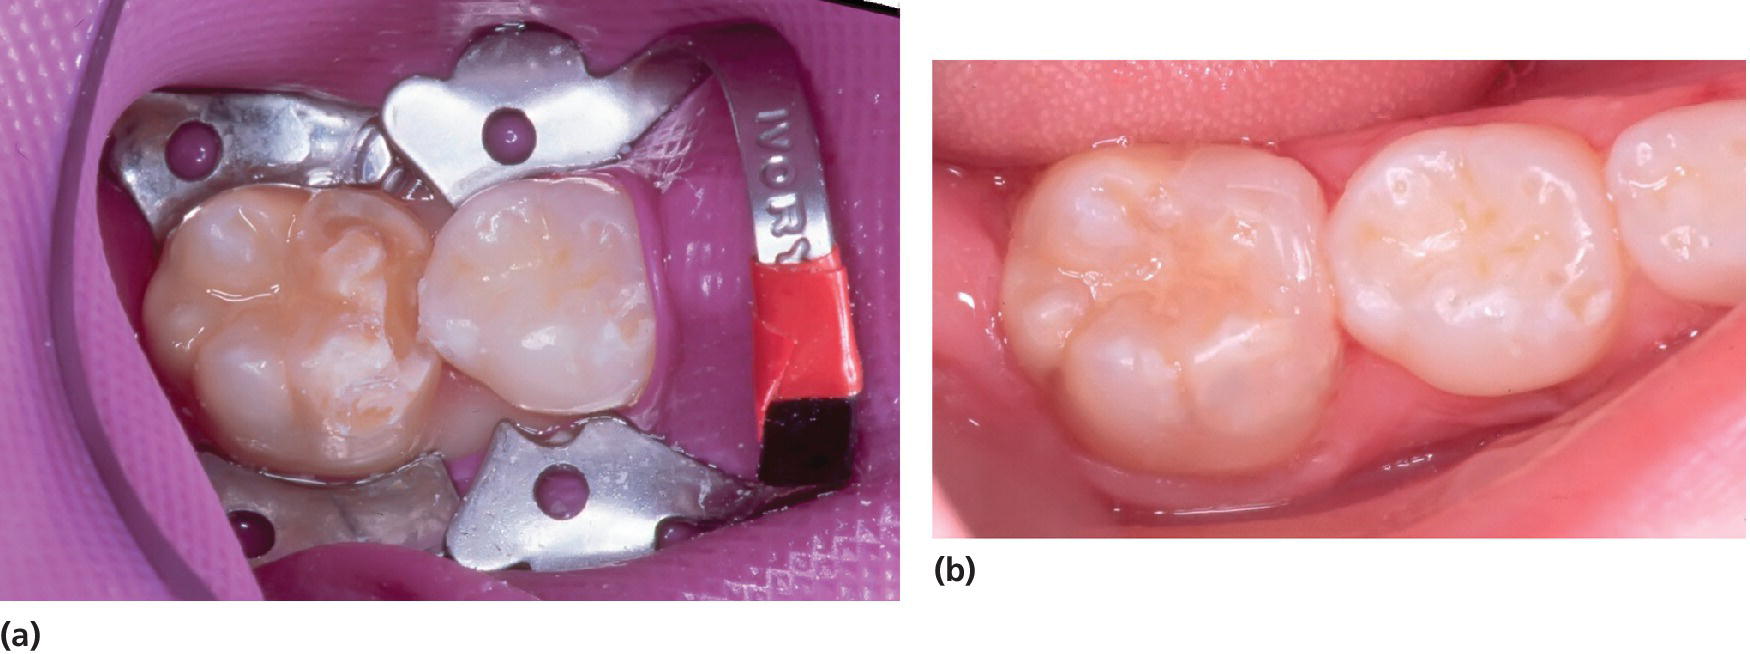 2 Photos displaying 2 molars of an 8-year-old girl affected with MIH with dental surrounding it ready for restoration (left) and the same molars right after restoration with composite (right).